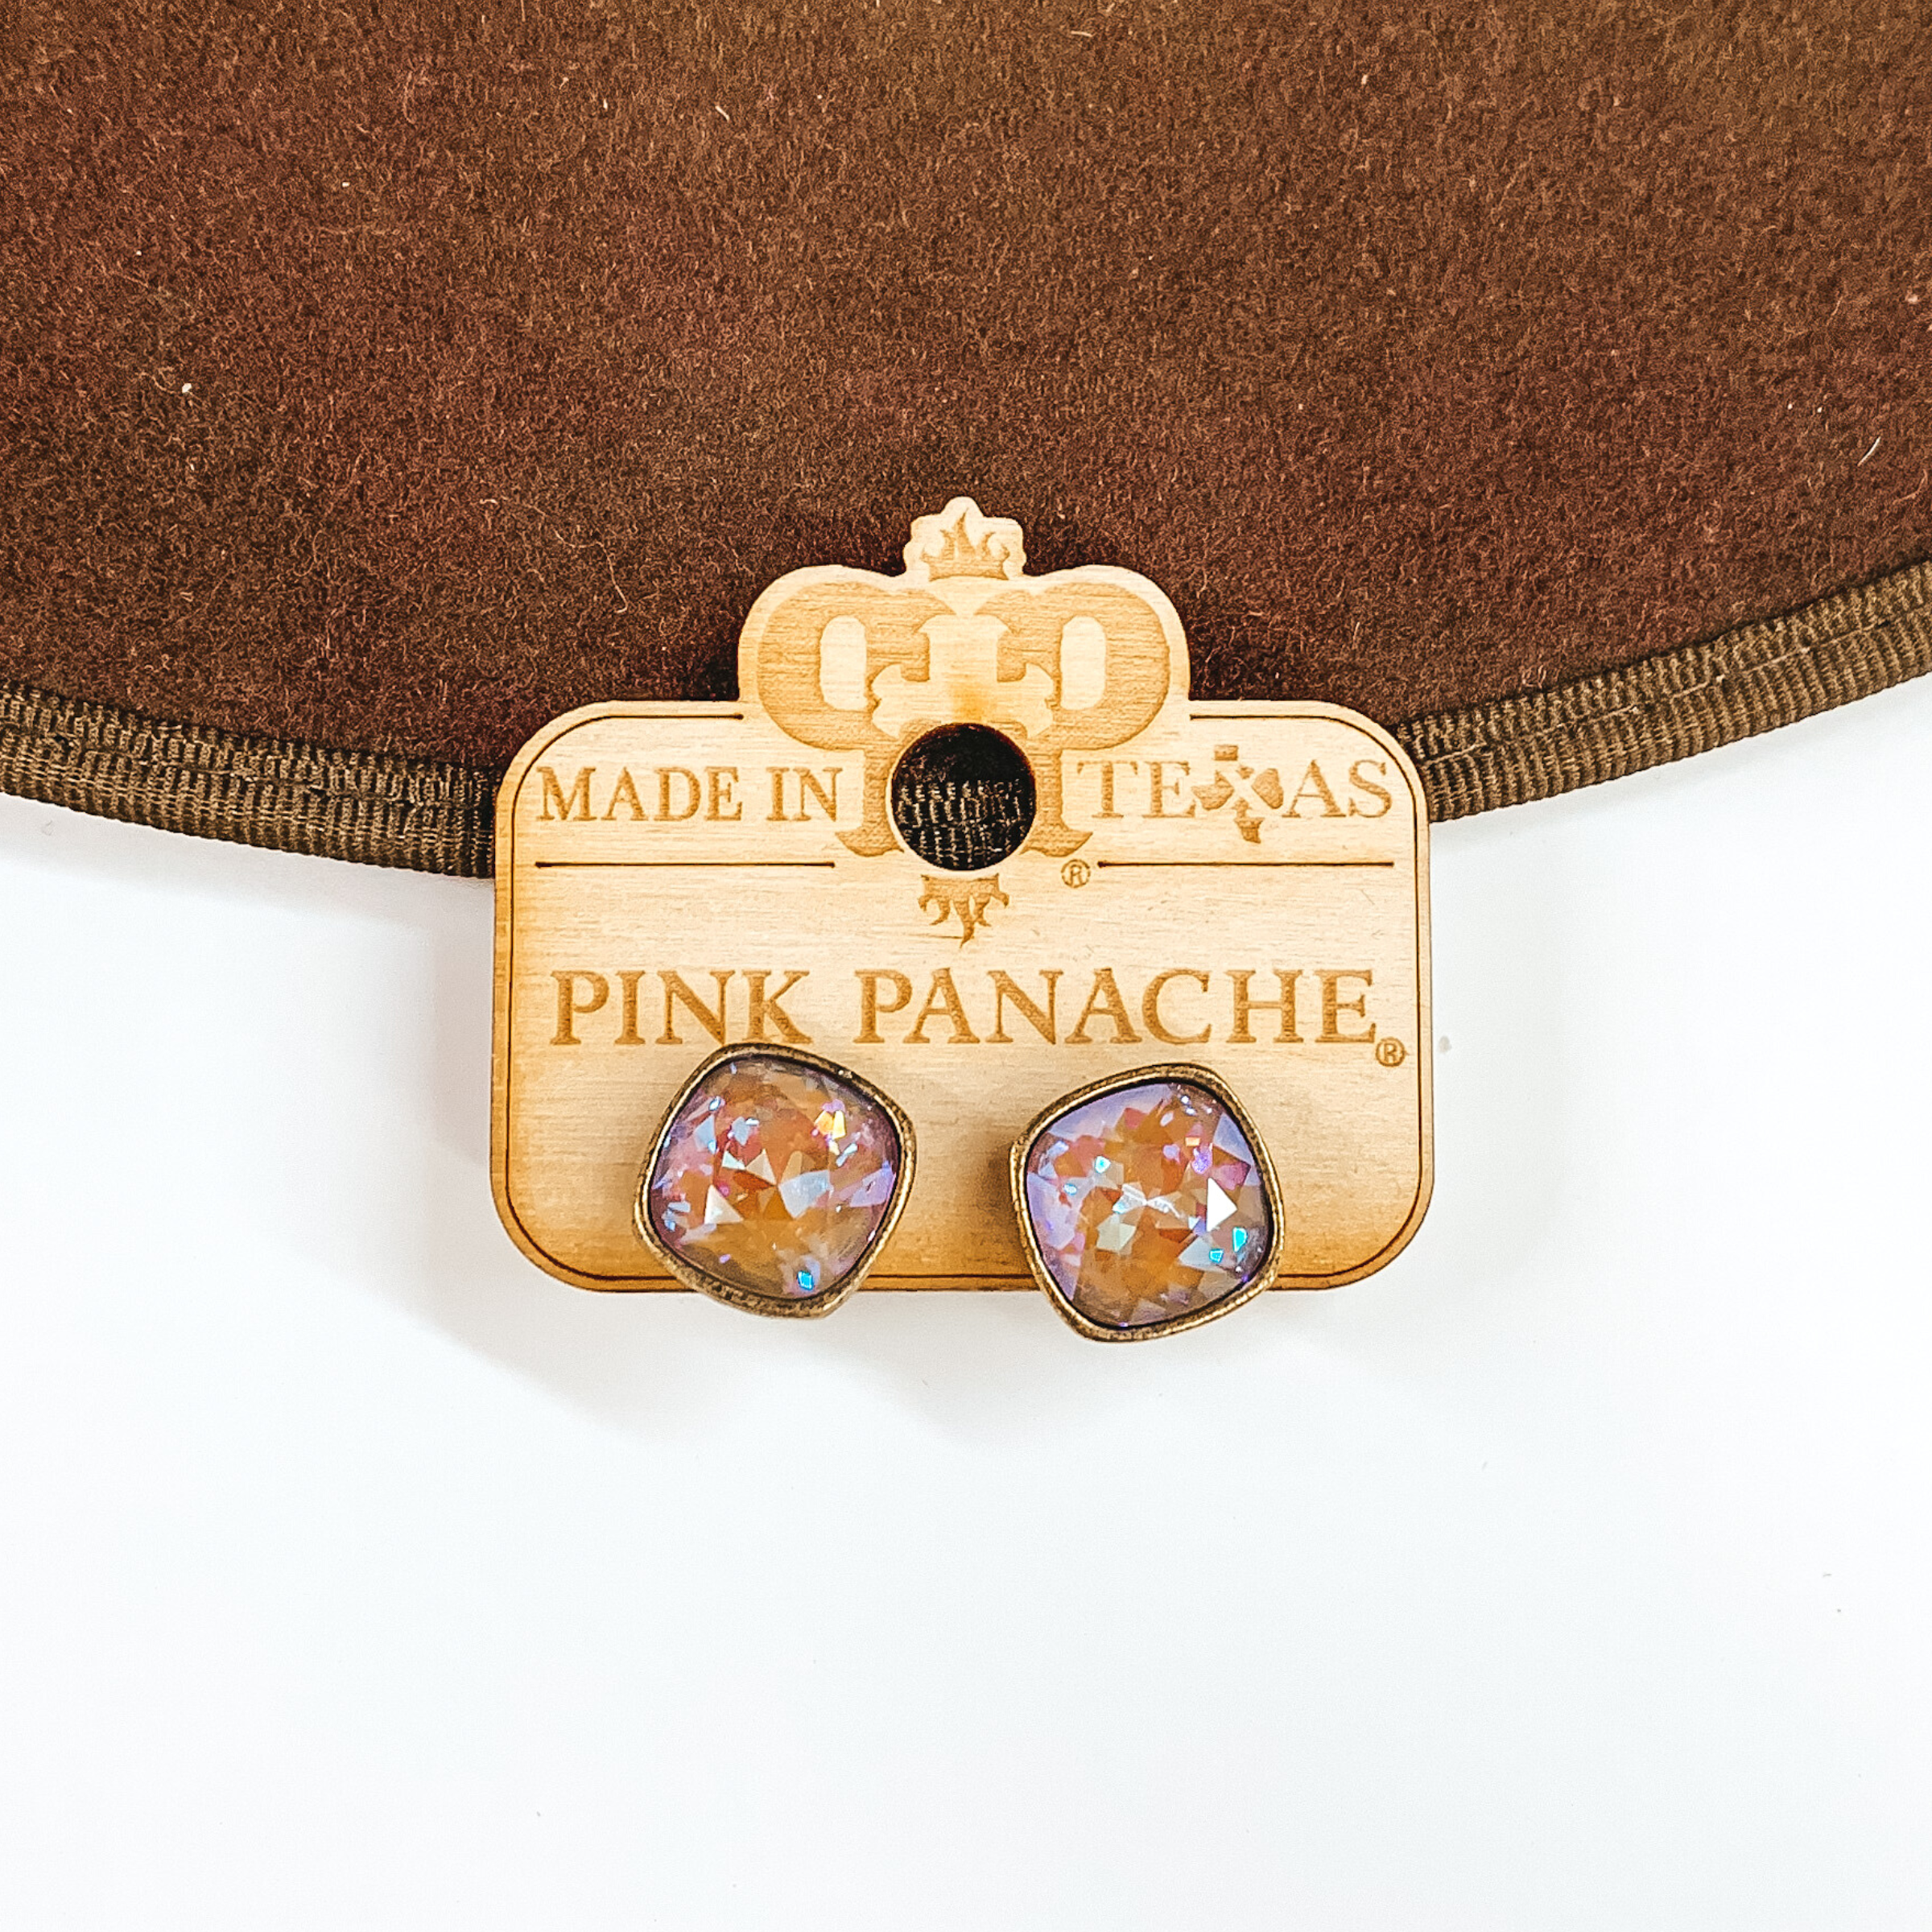 A pair of bronze earrings with cappuccino delight cushion cut crystals. These earring are pictured on a wood holder on a white and brown background.